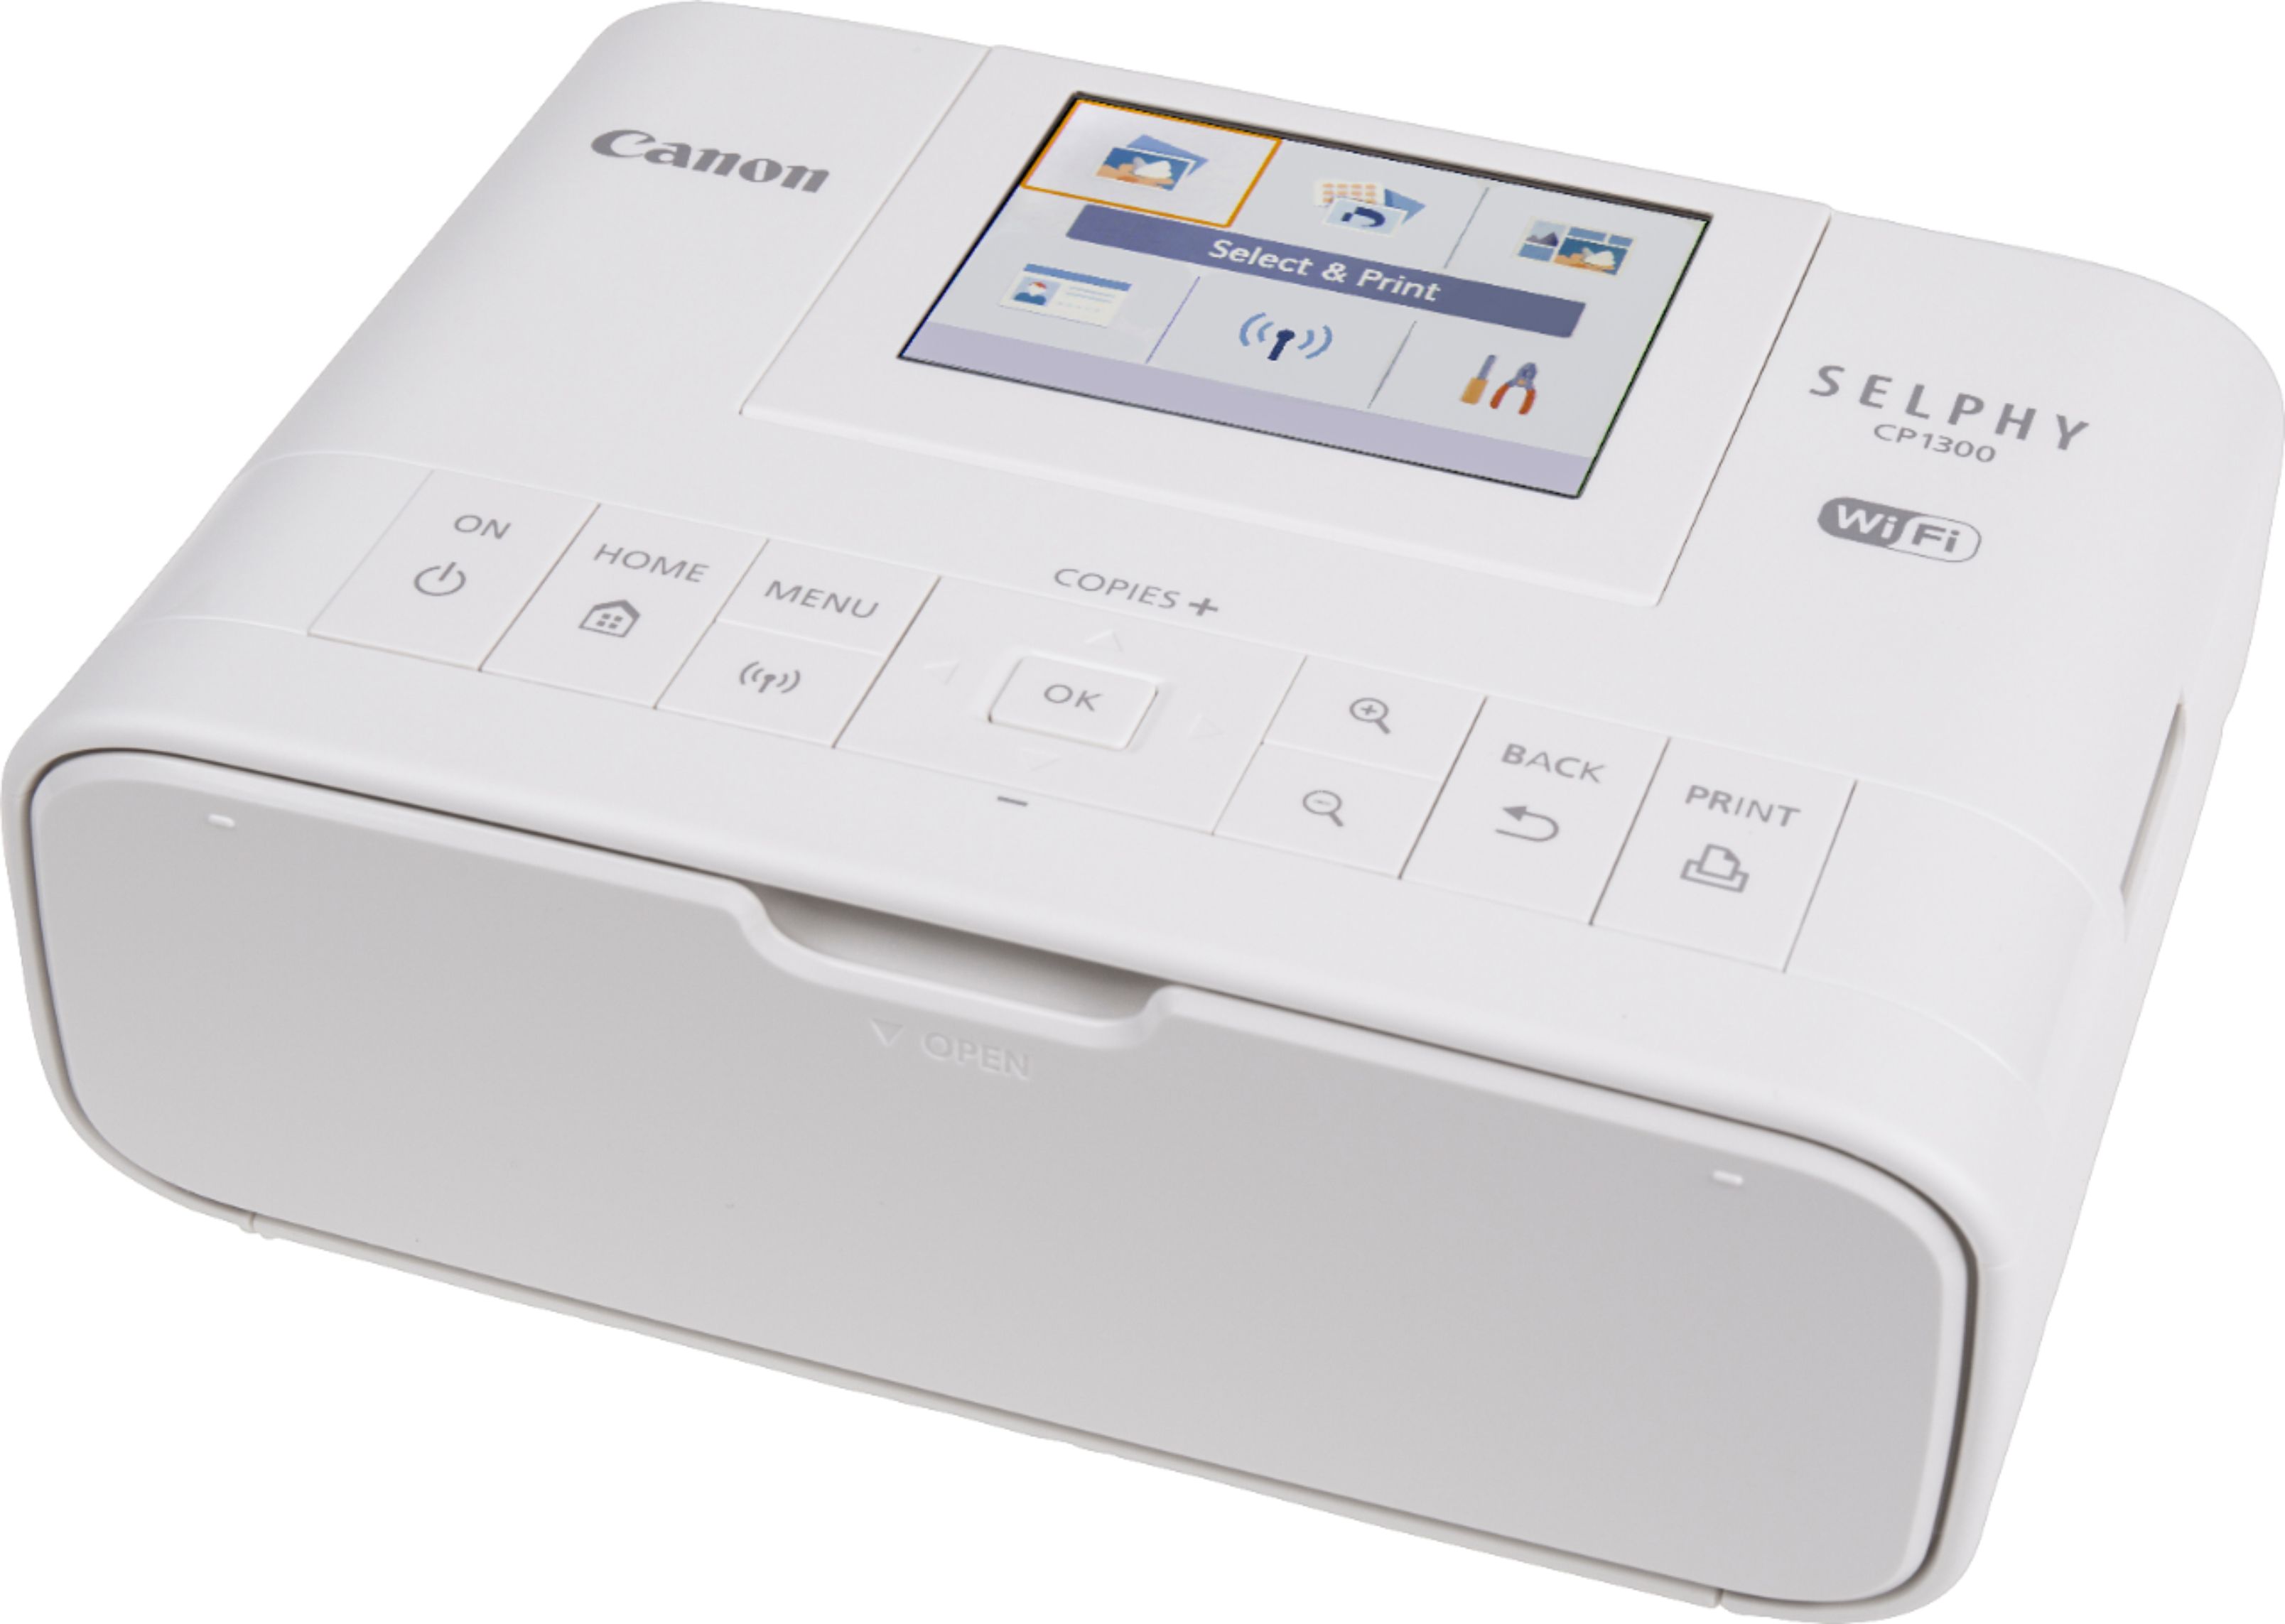 Best Buy: Canon SELPHY CP1300 Wireless Compact Photo Printer White